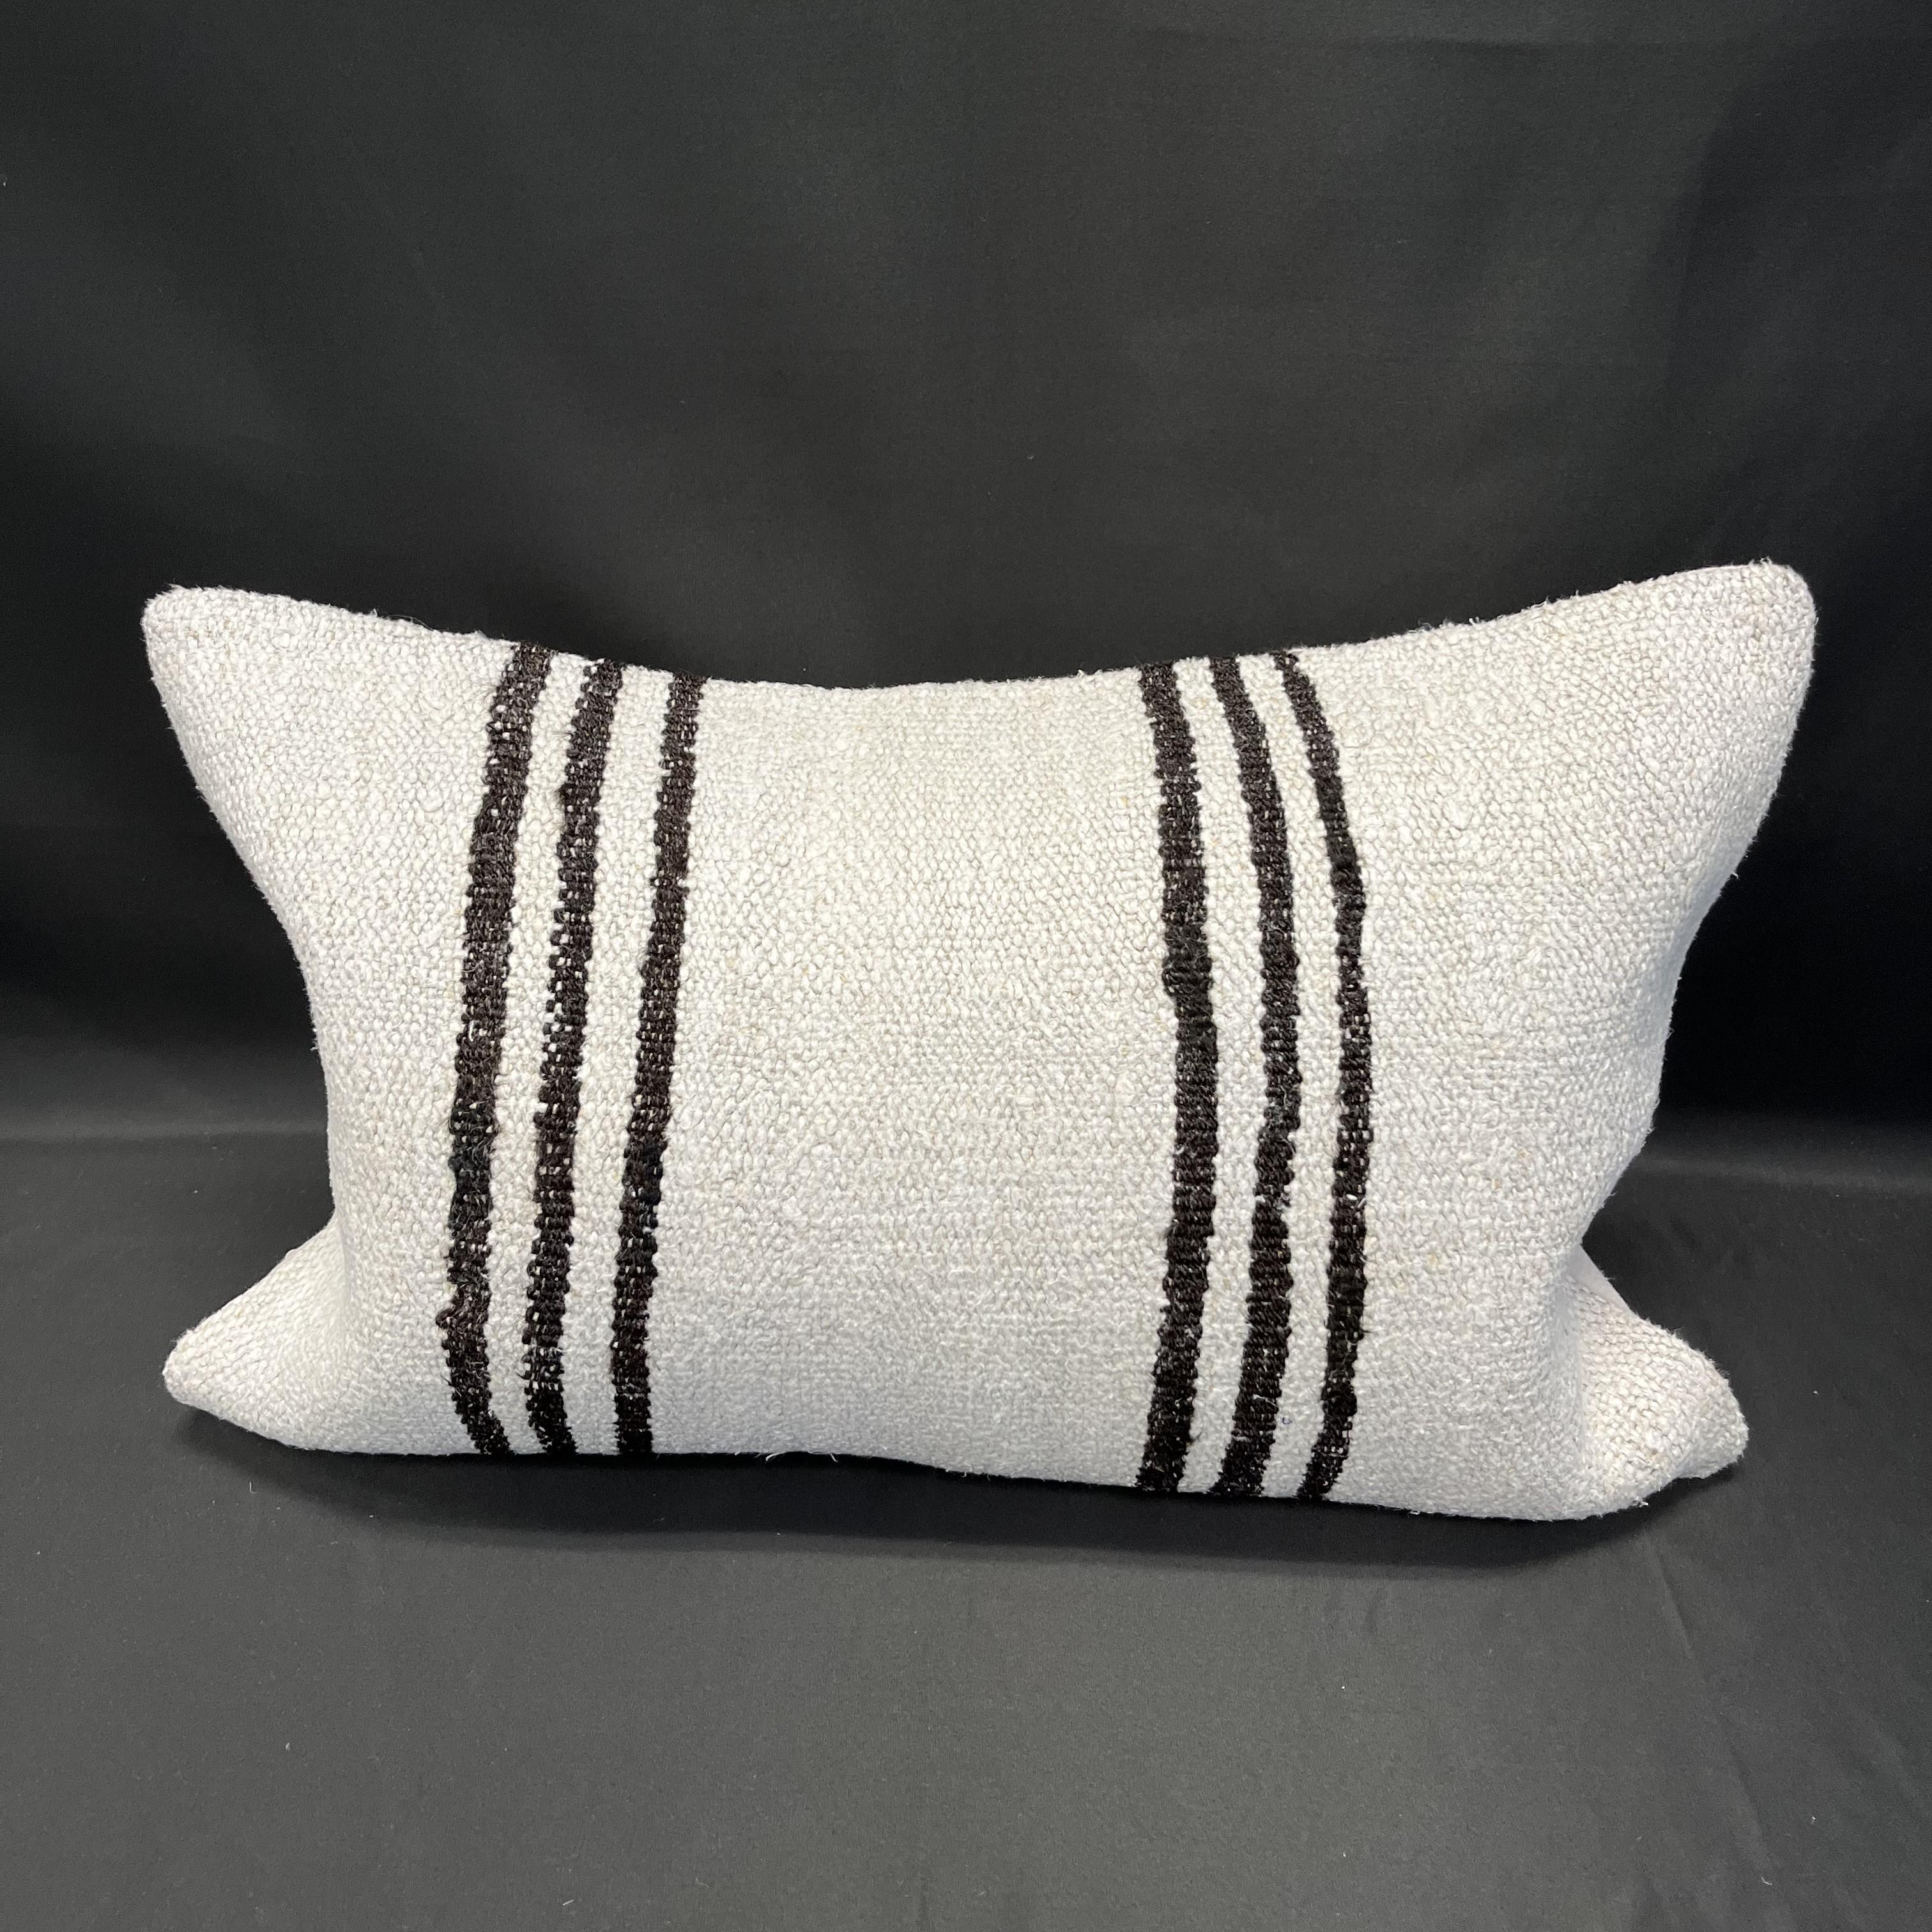 Looking for a sustainable and eco-friendly addition to your home decor? Check out our hemp pillow cover, perfect for adding a natural touch to your living space. Made from high-quality hemp fibers, this pillow cover is not only durable but also